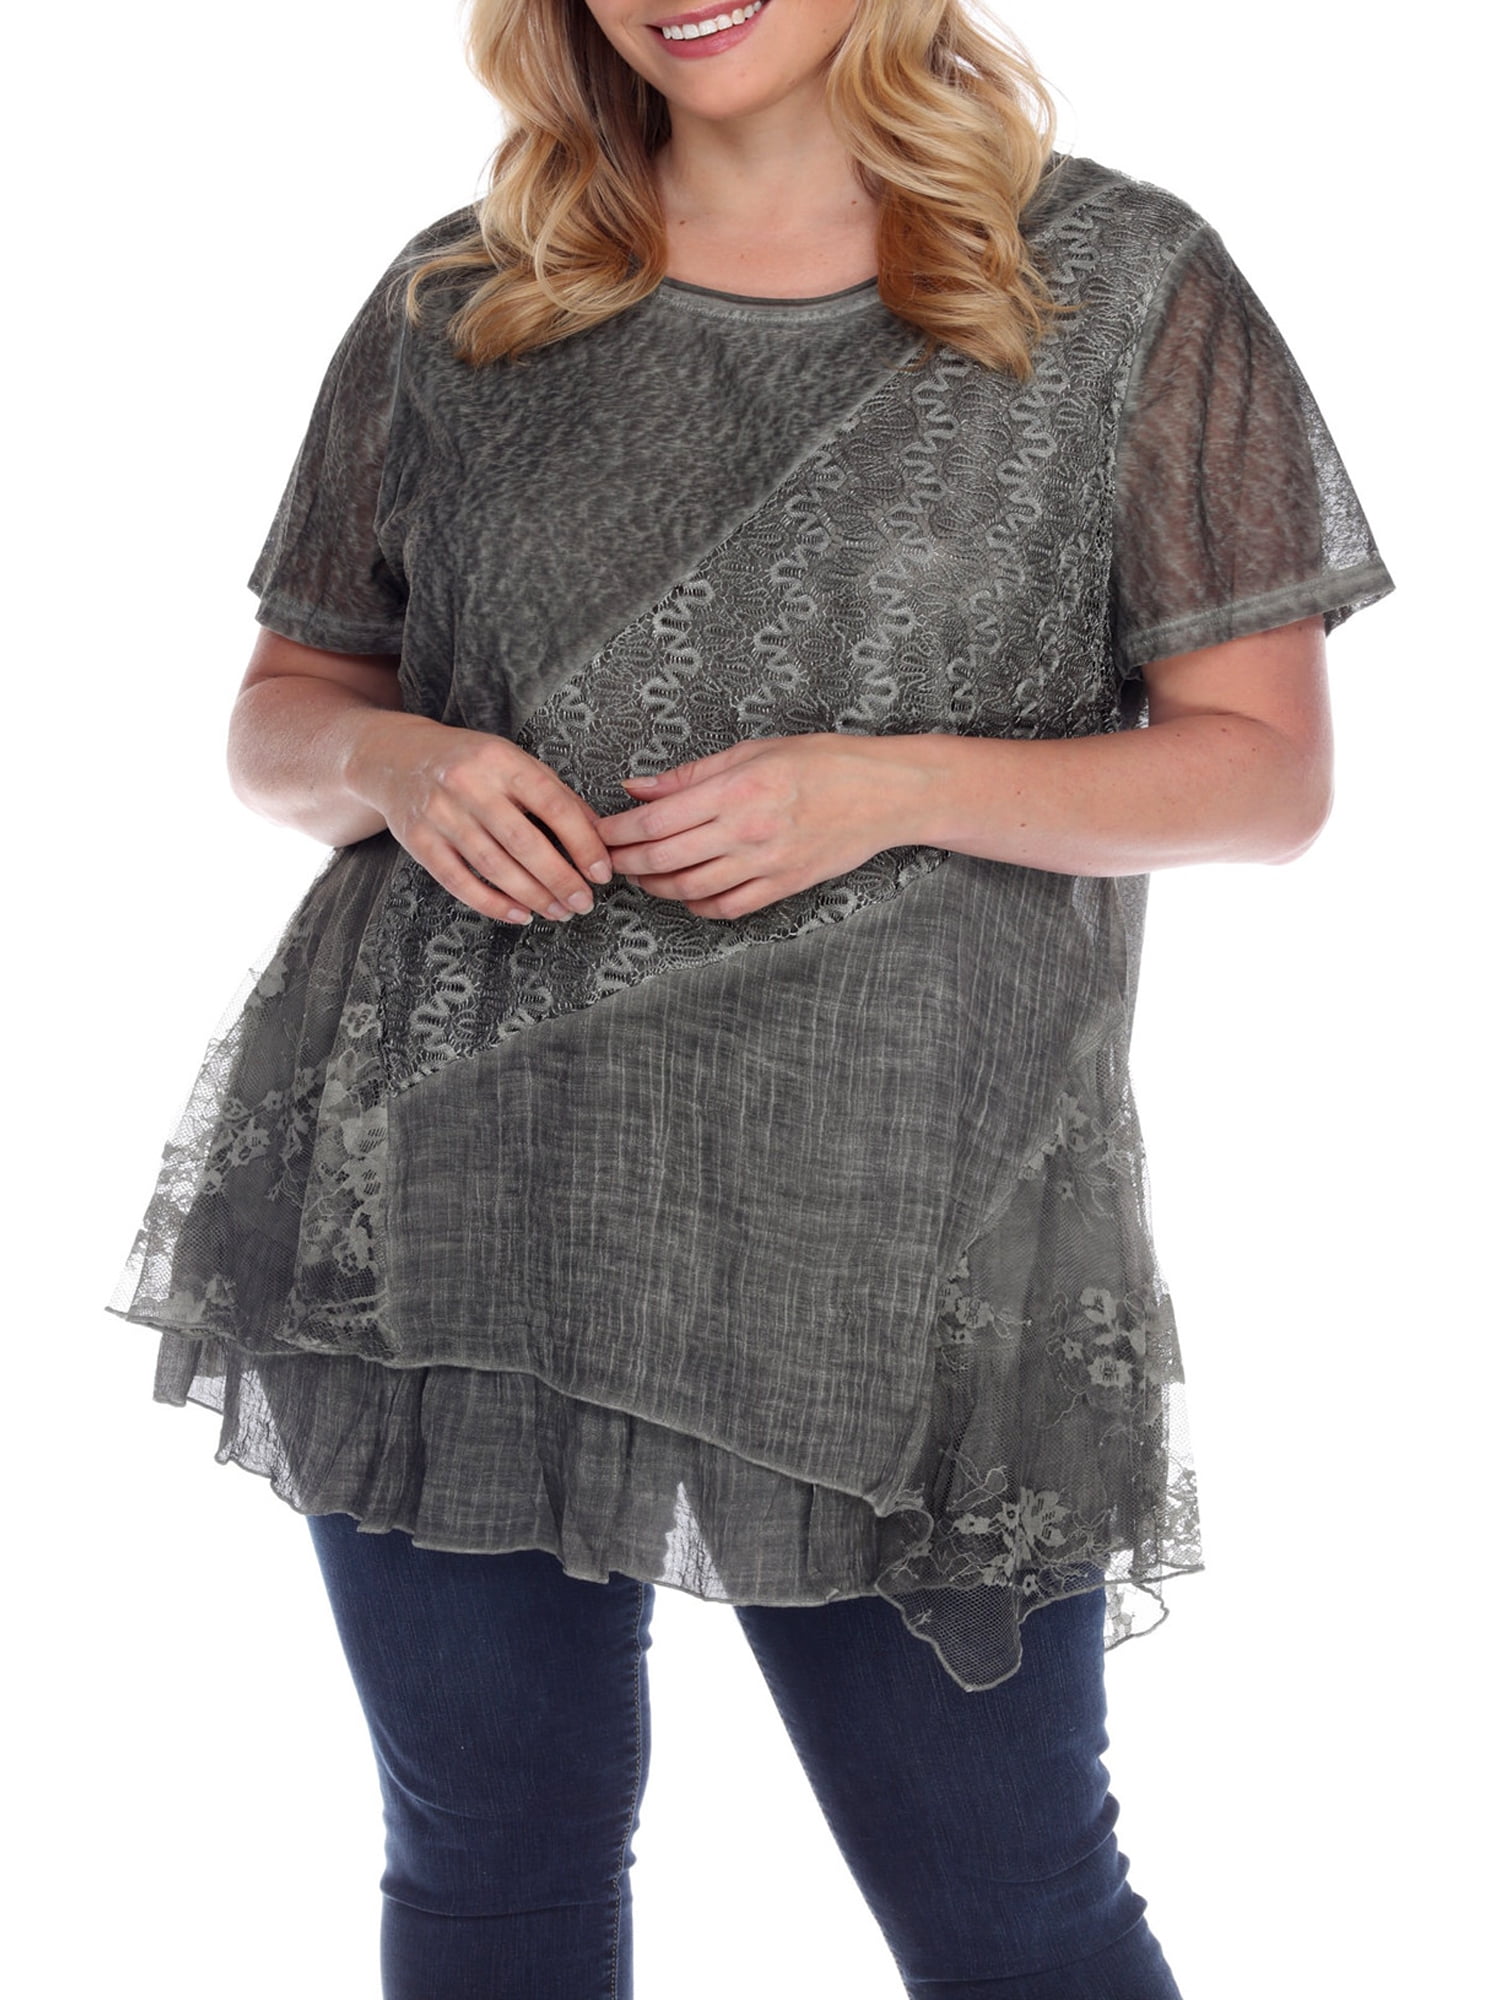 Simply Couture Women's Plus Size Short Sleeve Lace Mixed Media Layer ...